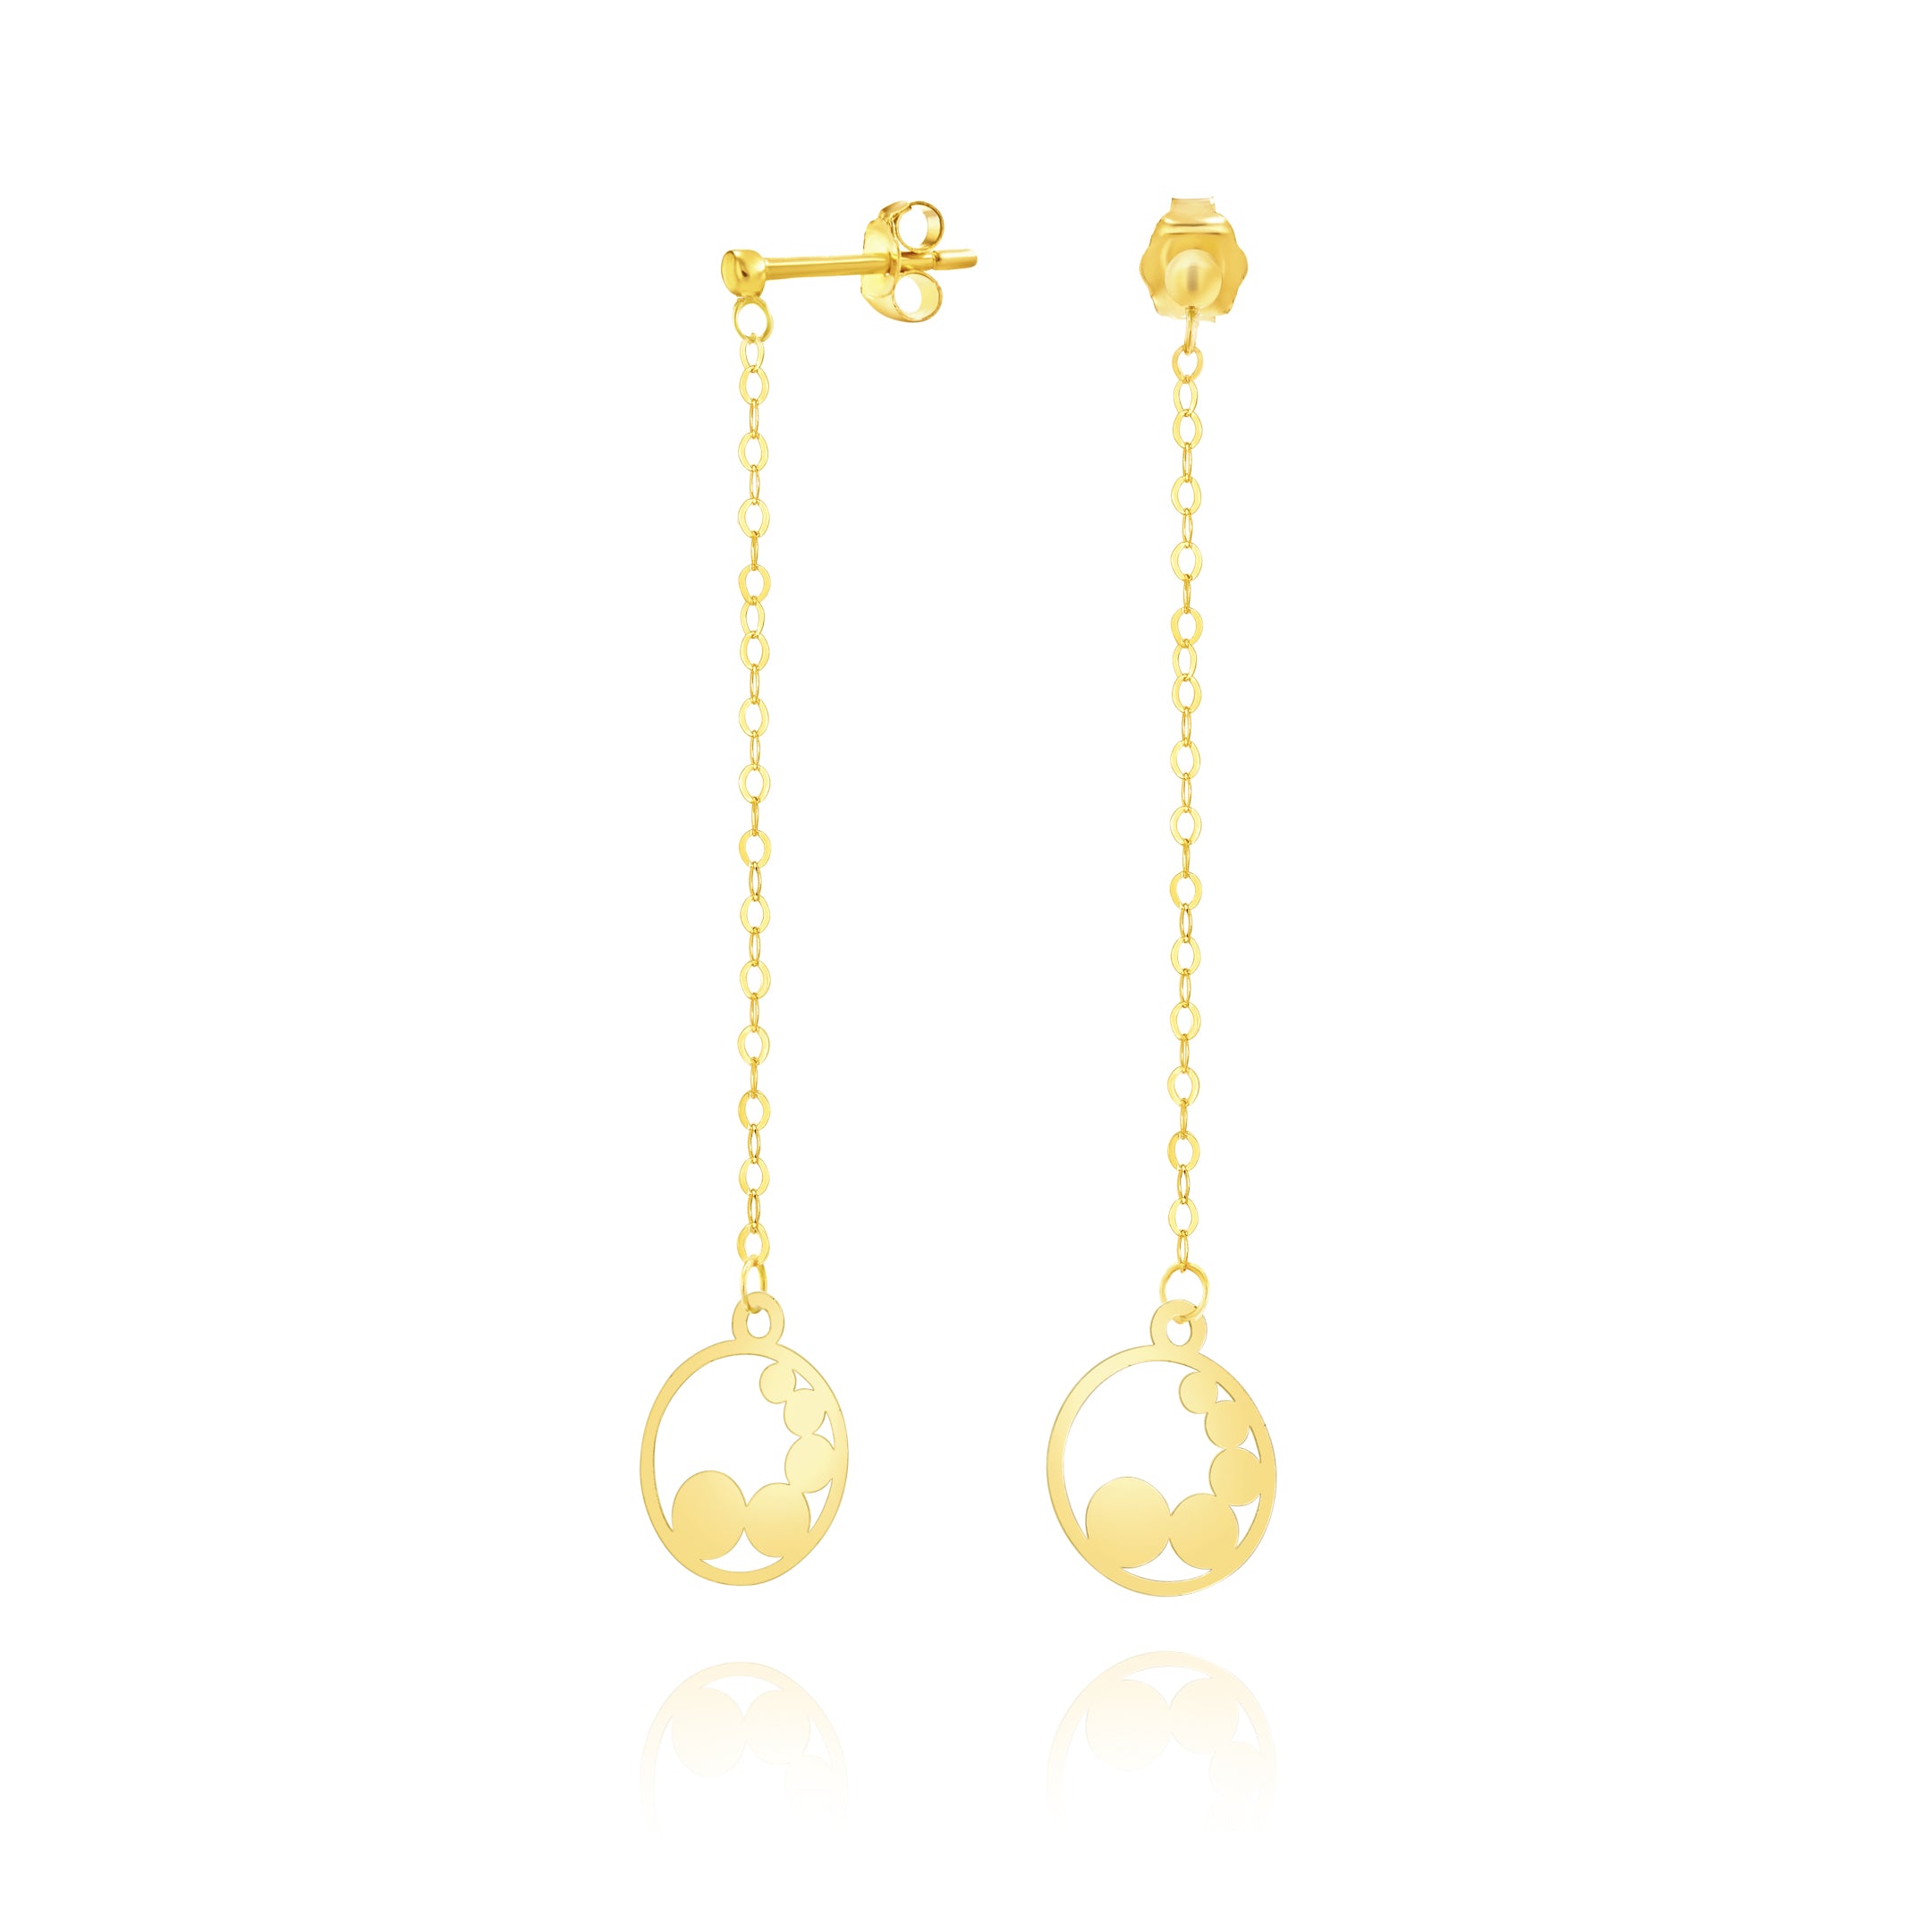 18K Pure Gold Hanging Round Earring Set